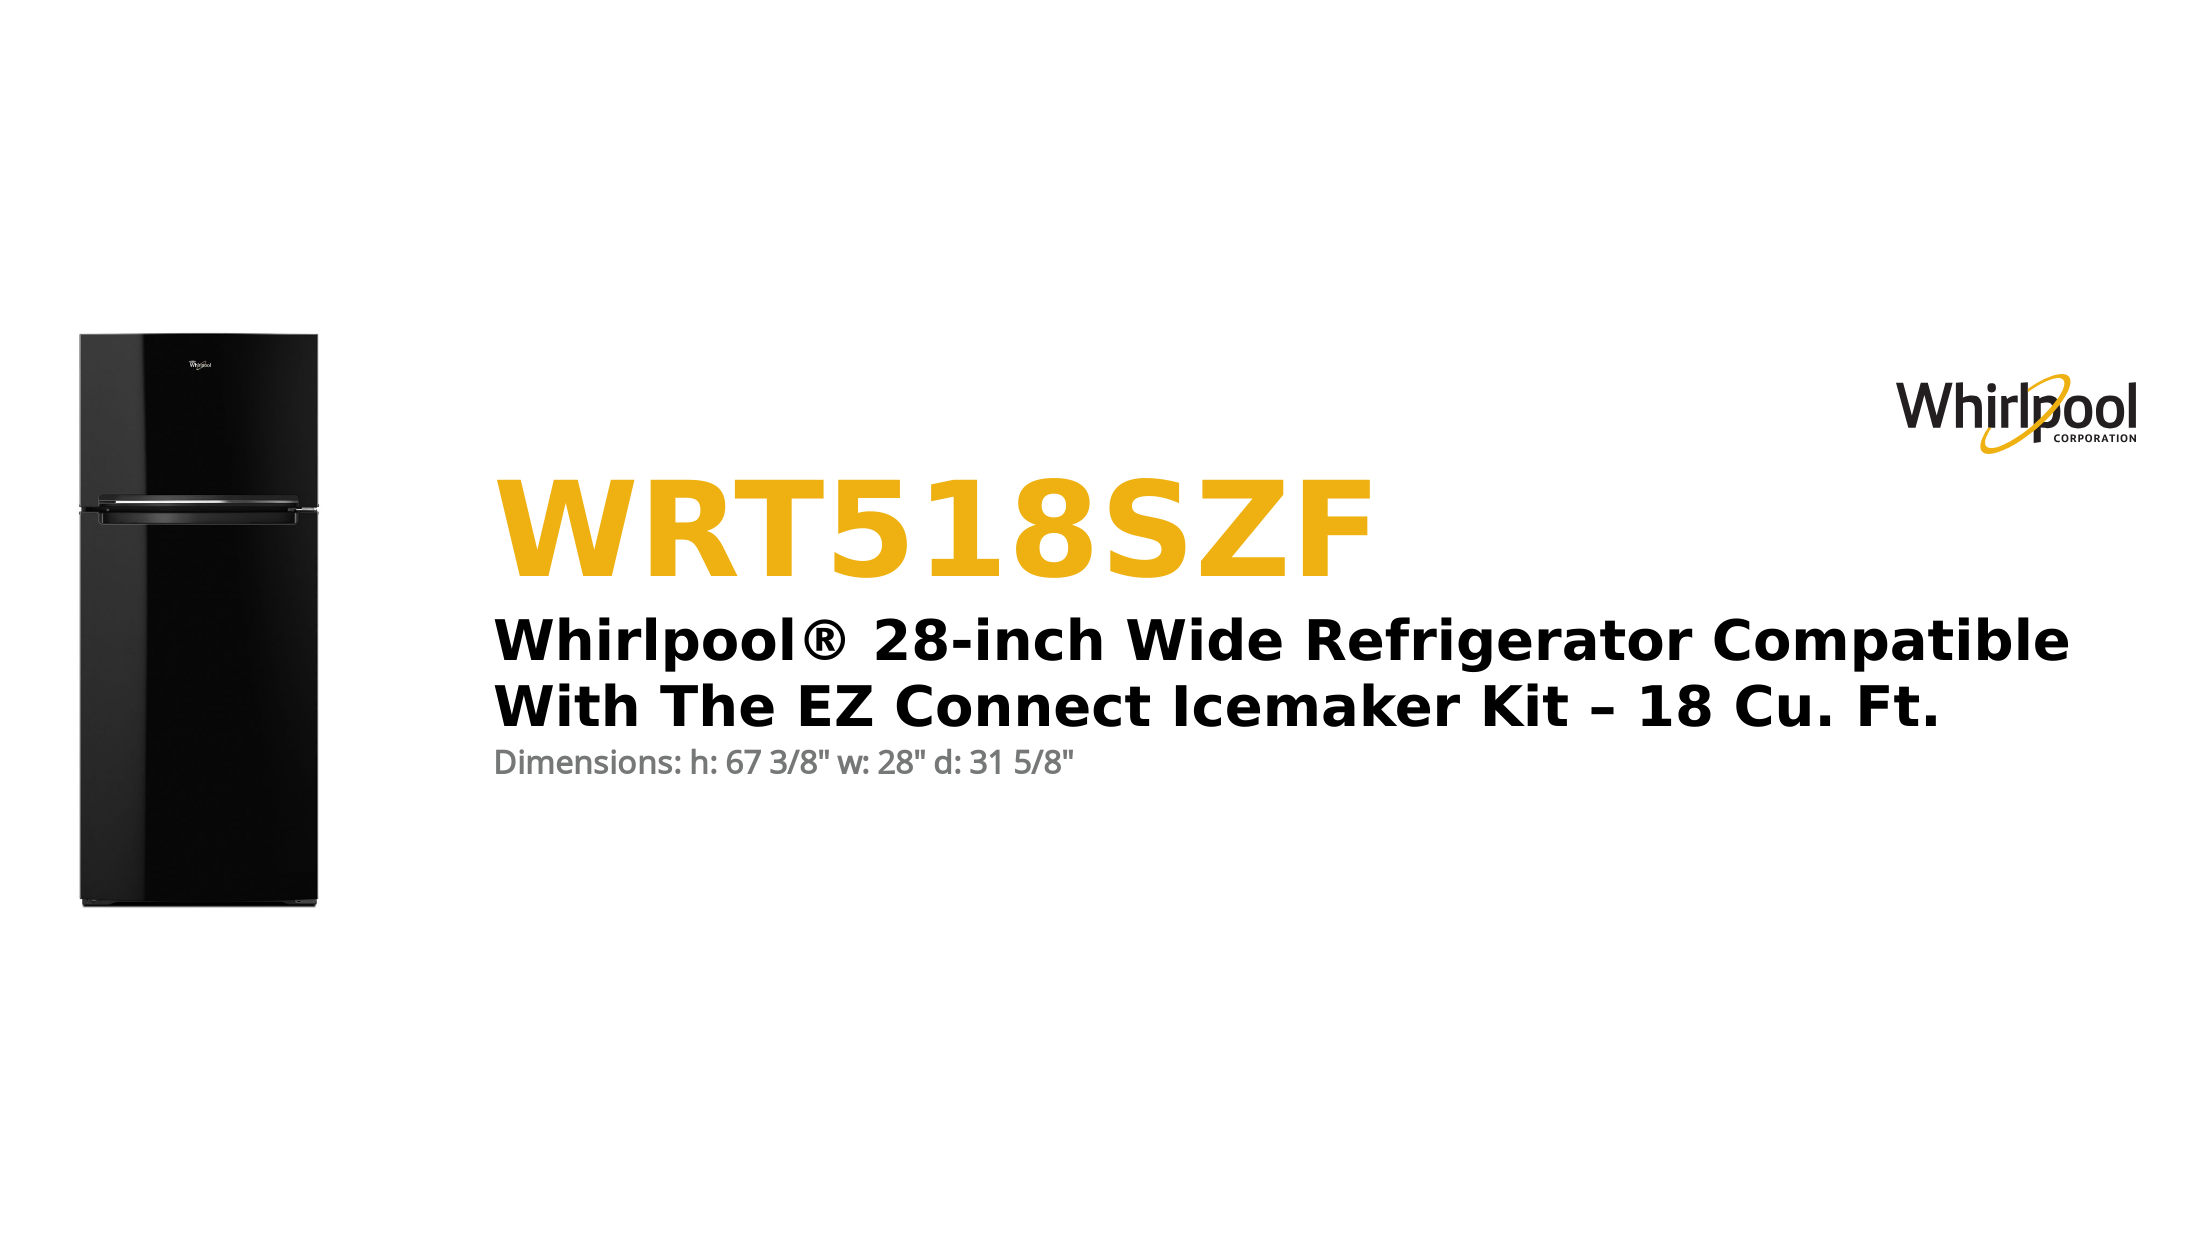 Whirlpool® 28-inch Wide Refrigerator Compatible With The EZ Connect Icemaker Kit – 18 Cu. Ft.